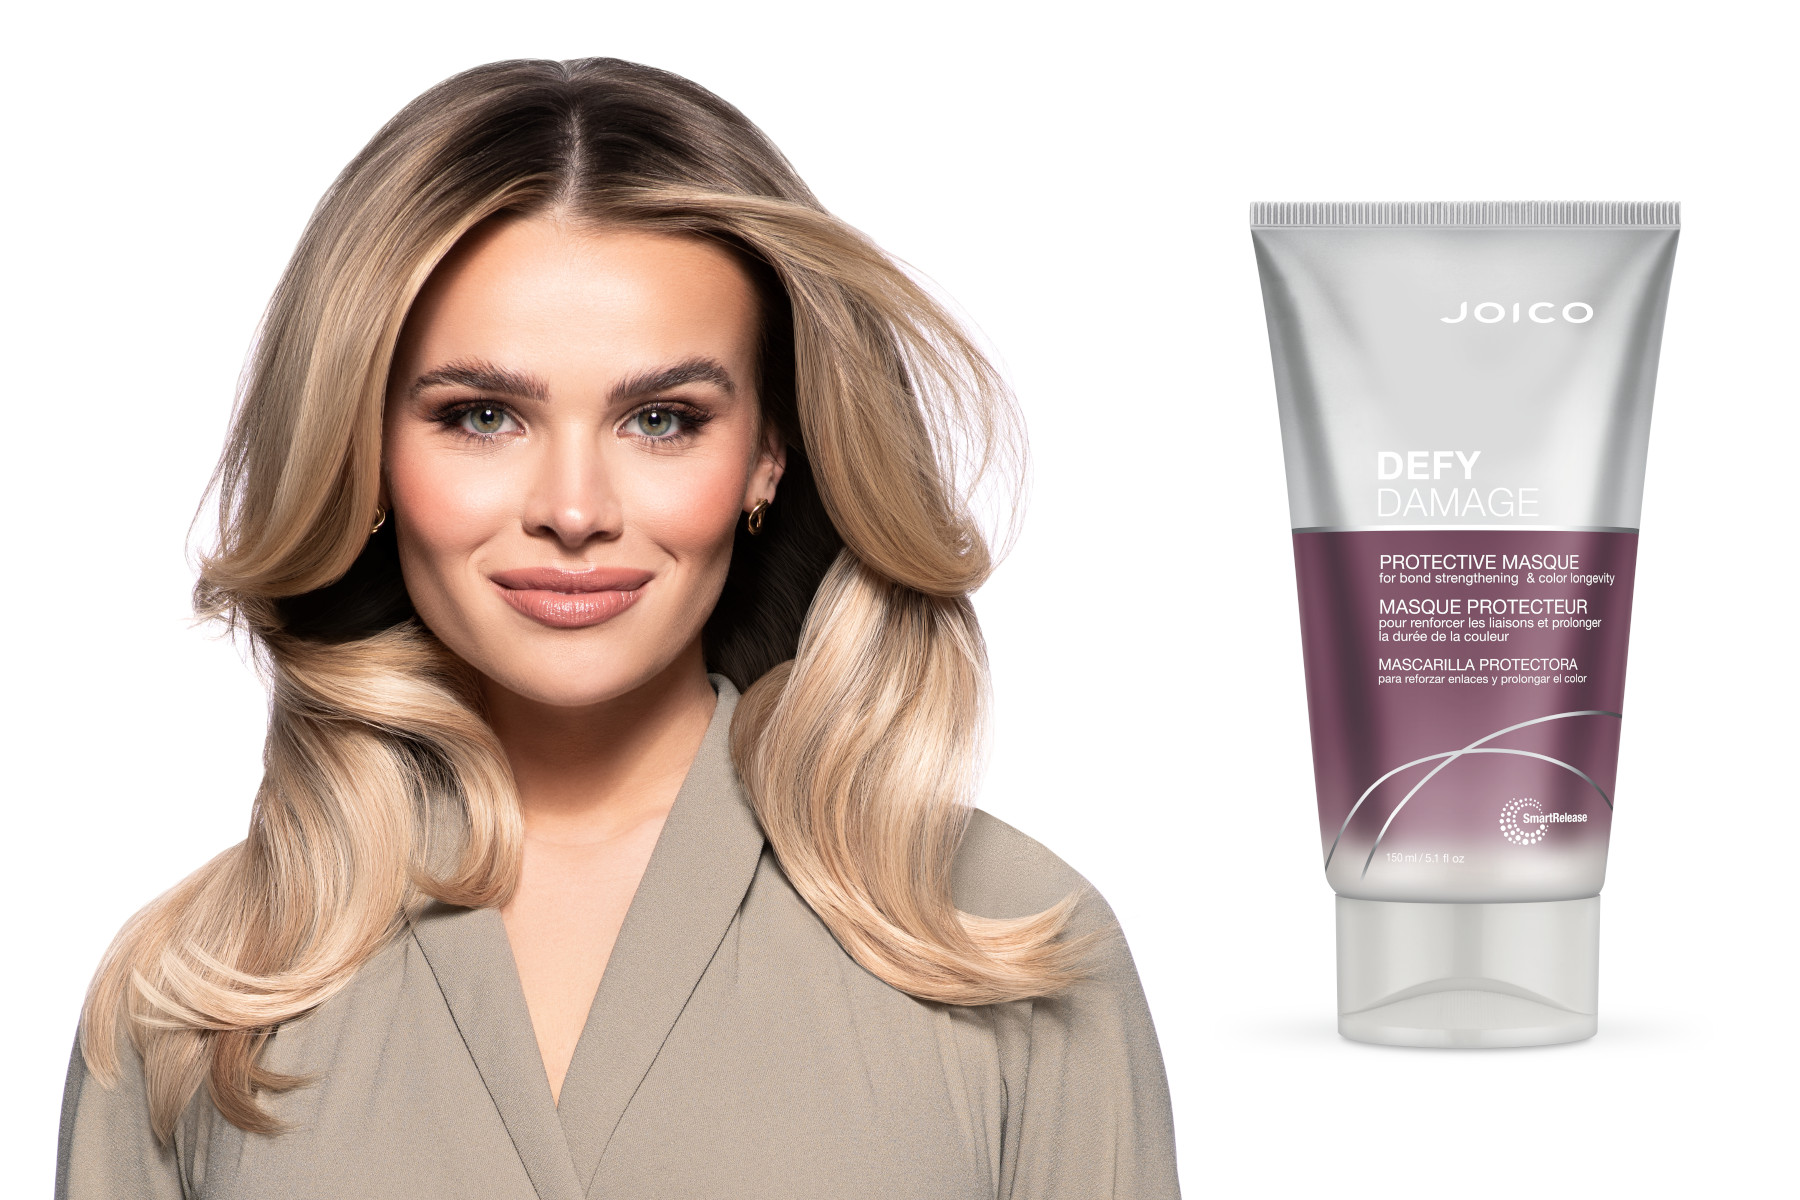 defy damage protective masque with model